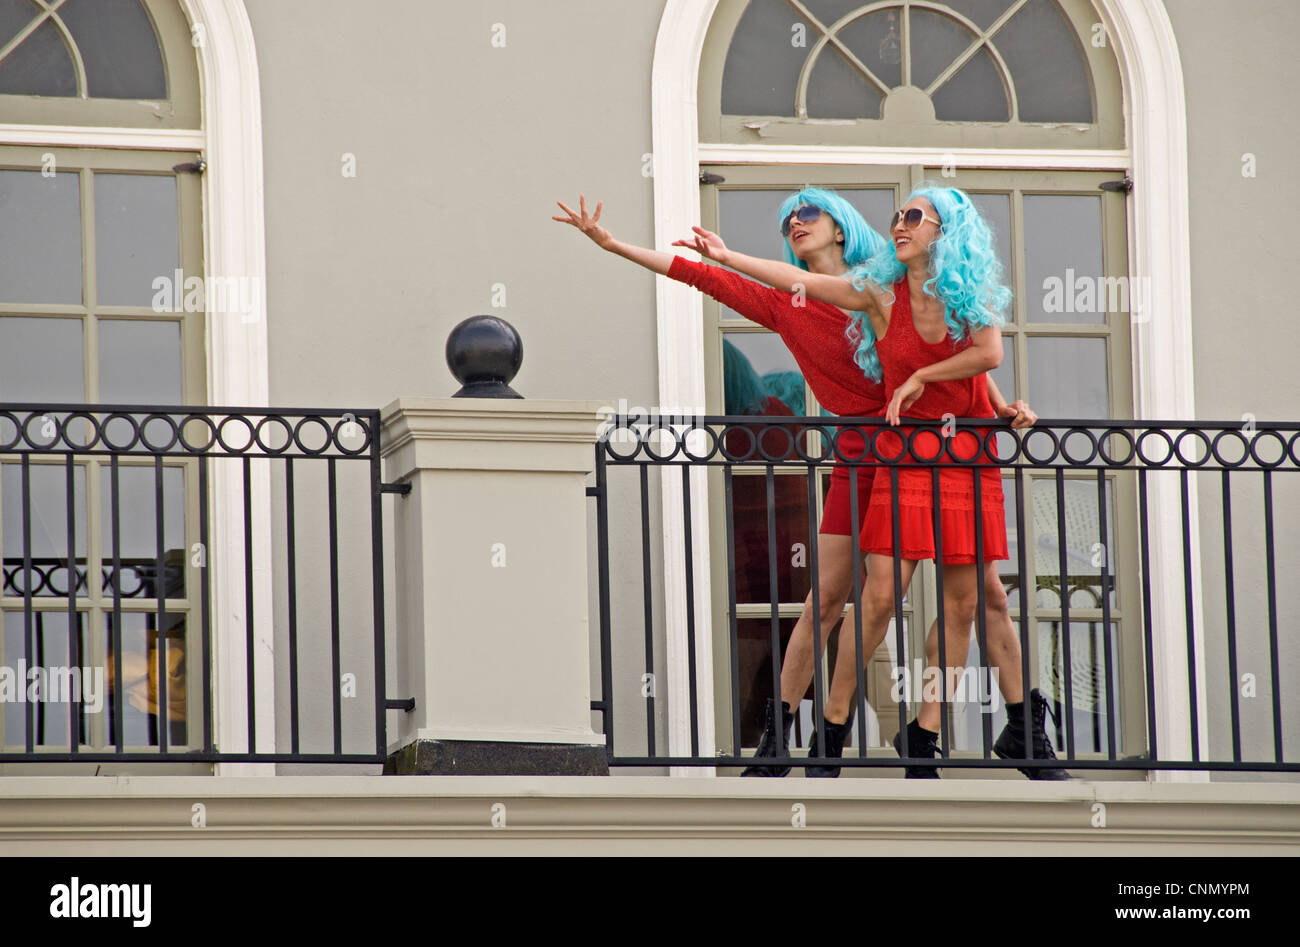 Two members of San Francisco's Tolley Dancers perform In the West Portal neighborhood Stock Photo